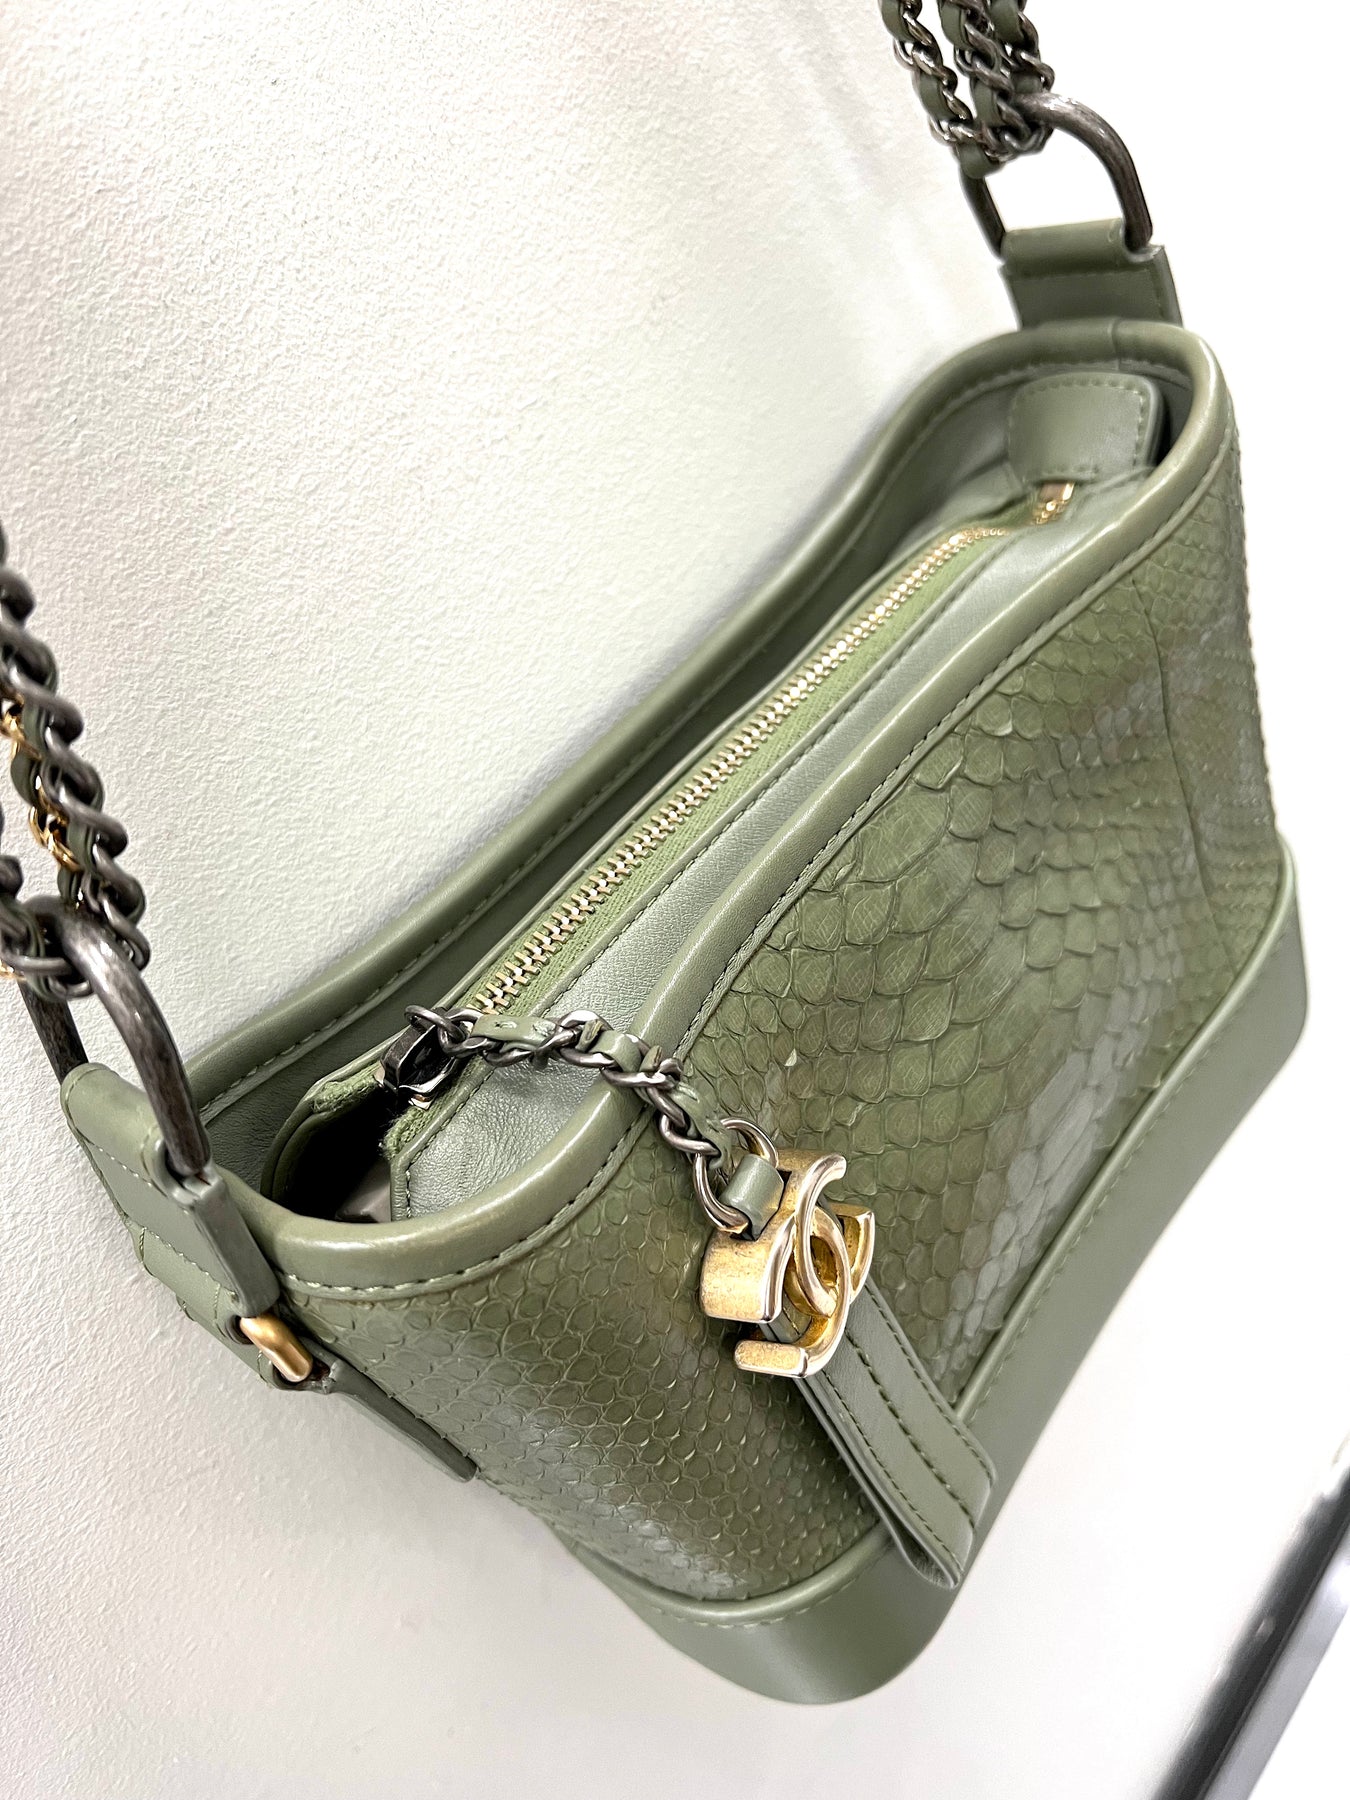 Chanel Green Quilted Leather Small Gabrielle Bag Chanel